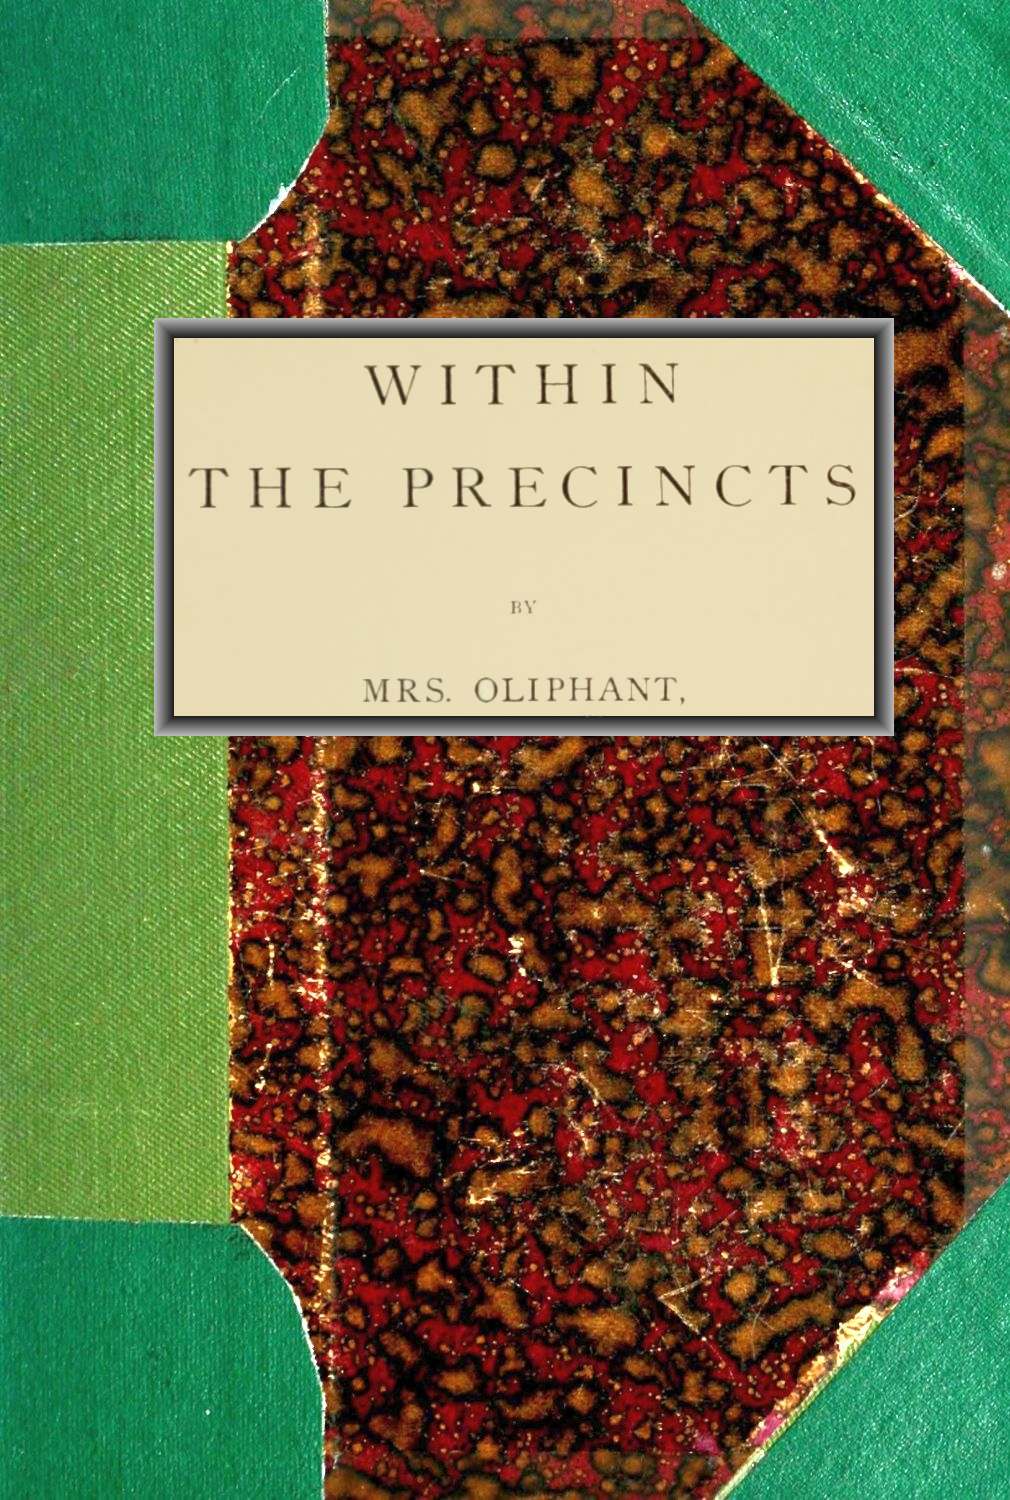 The Project Gutenberg eBook of Within the Precincts, by photo pic